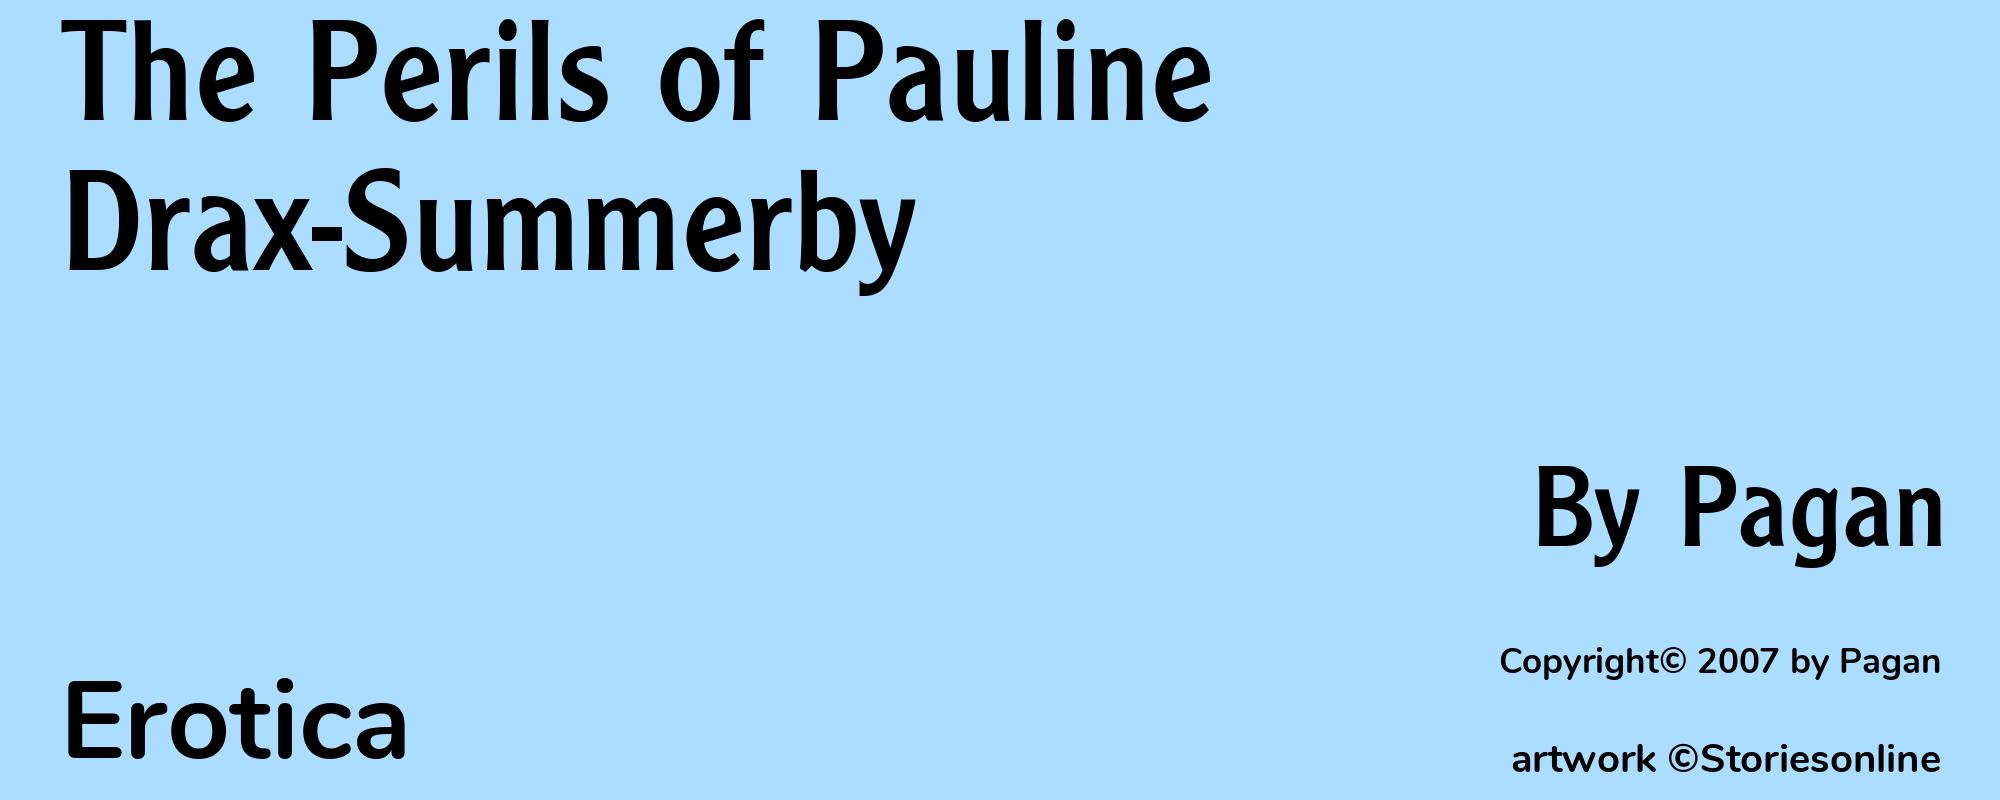 The Perils of Pauline Drax-Summerby - Cover